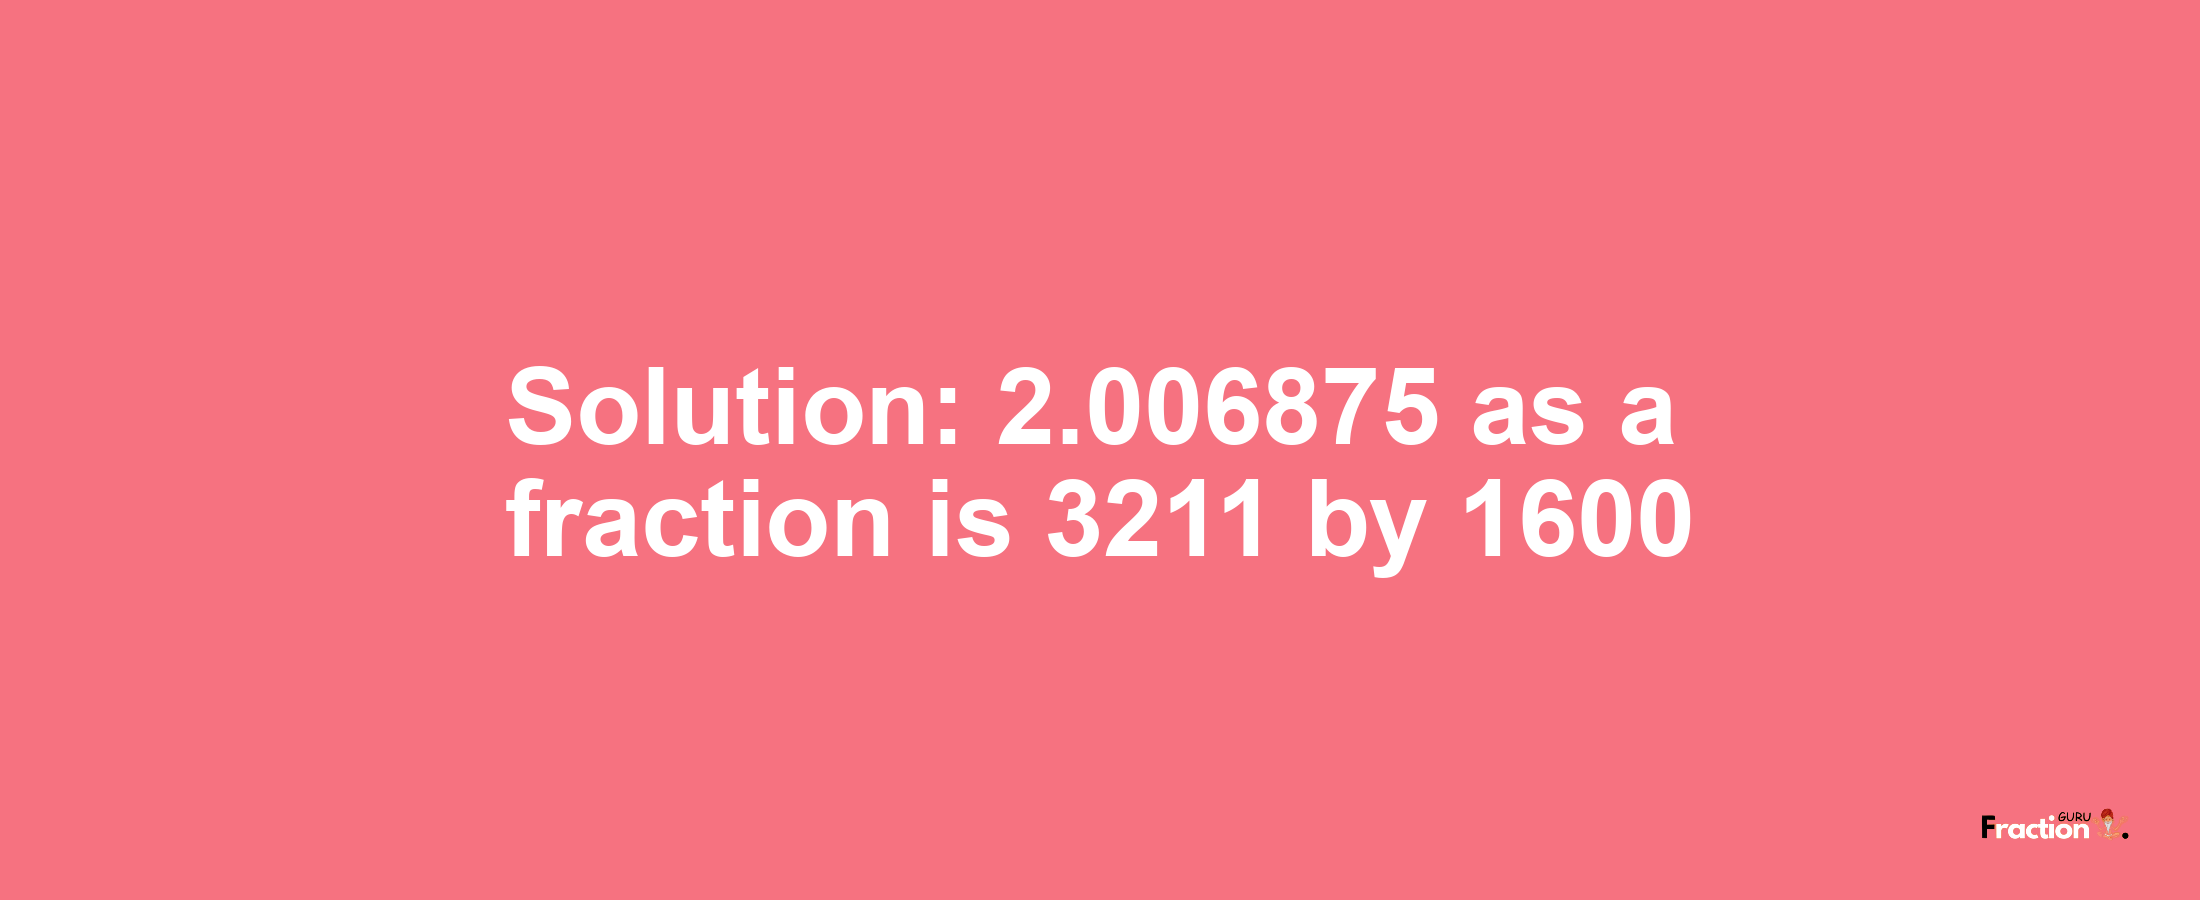 Solution:2.006875 as a fraction is 3211/1600